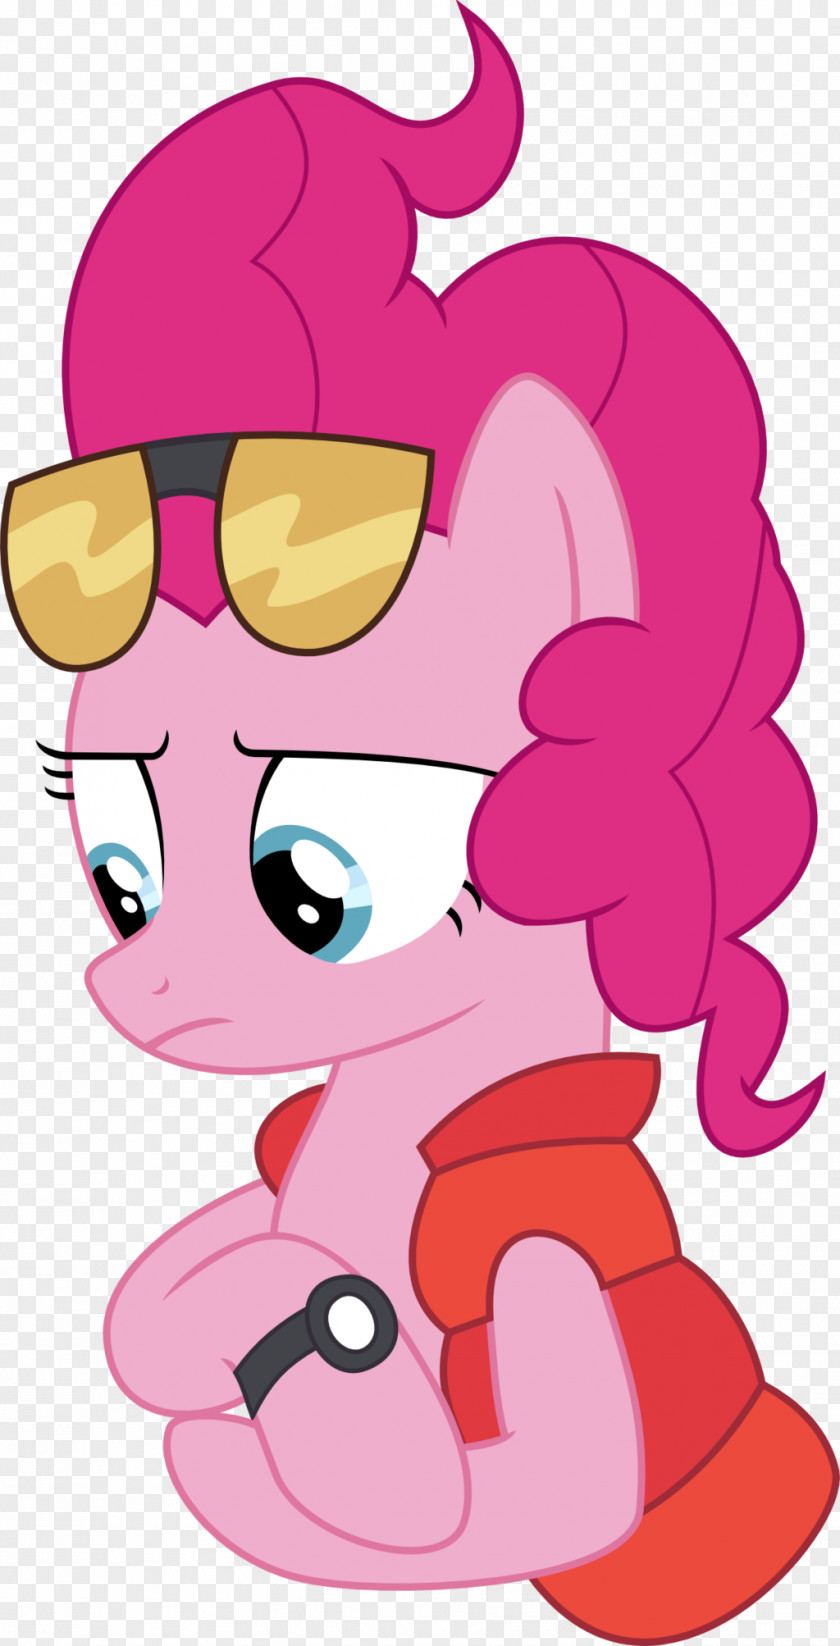 Bttf Pinkie Pie Fluttershy Back To The Future PNG